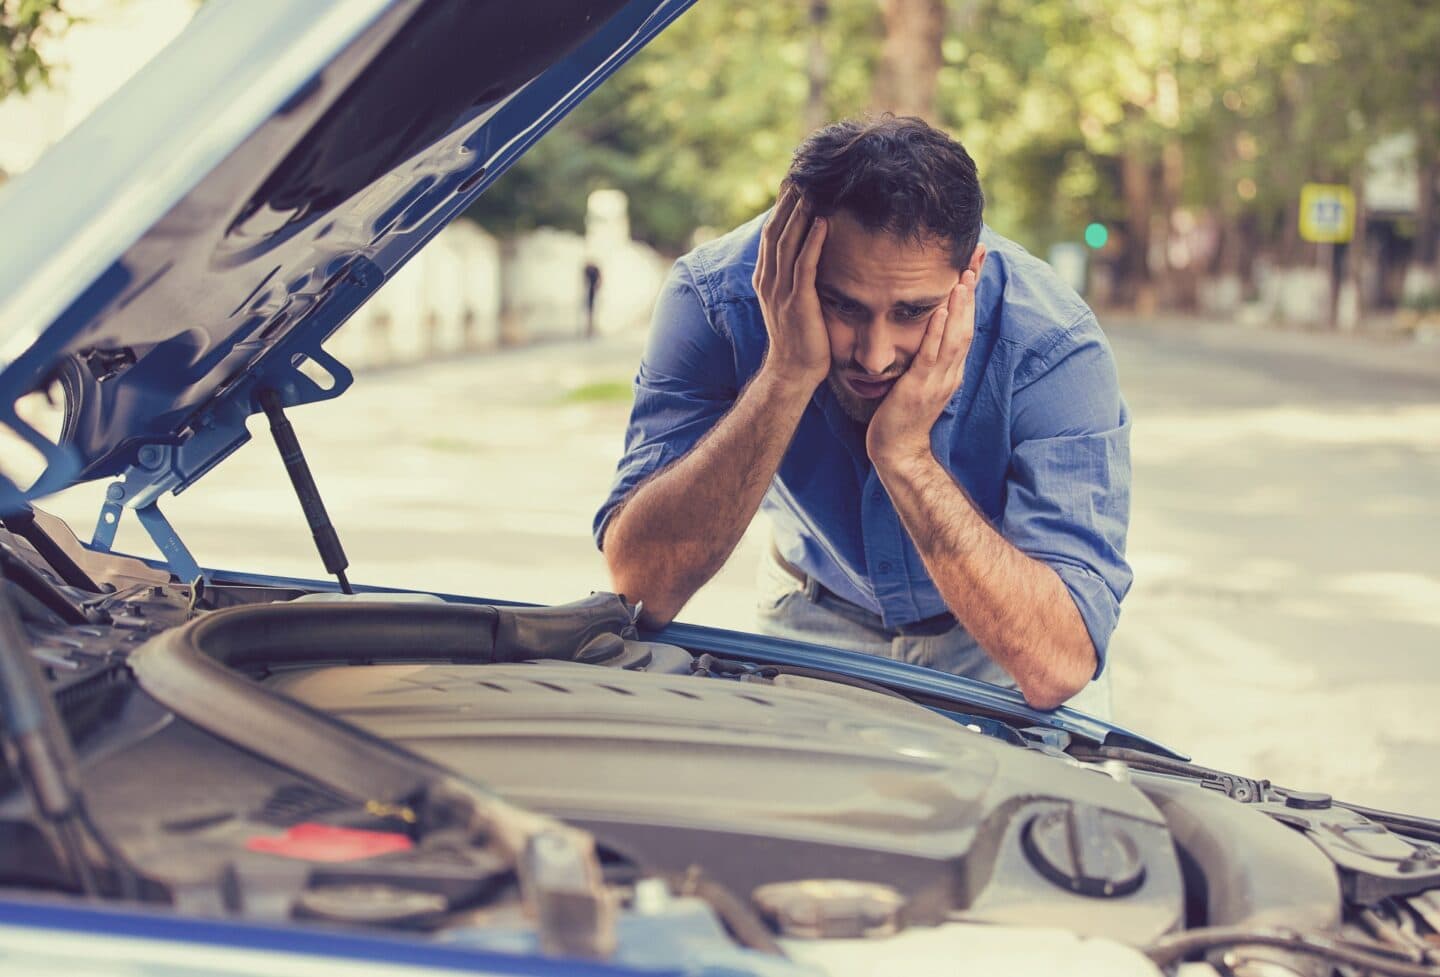 A man appears stressed while looking at his car's open hood on the side of a tree-lined street.